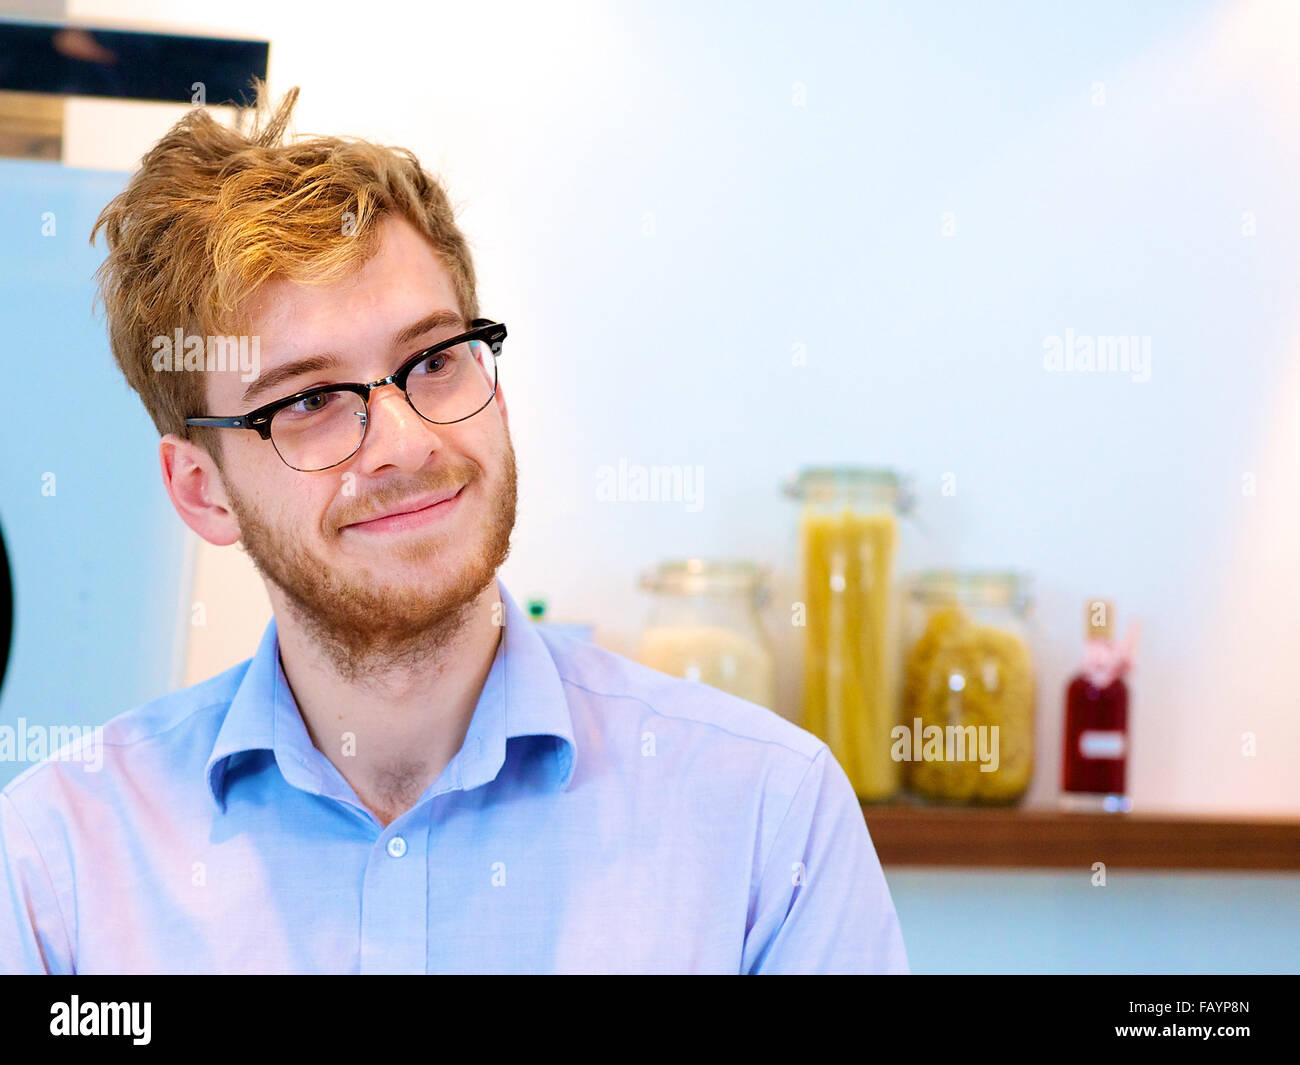 Pictured is Mr James Morton of the BBC hit TV Show 'THE GREAT BRITISH BAKE OFF'.  James, who is currently working on his bakery Stock Photo